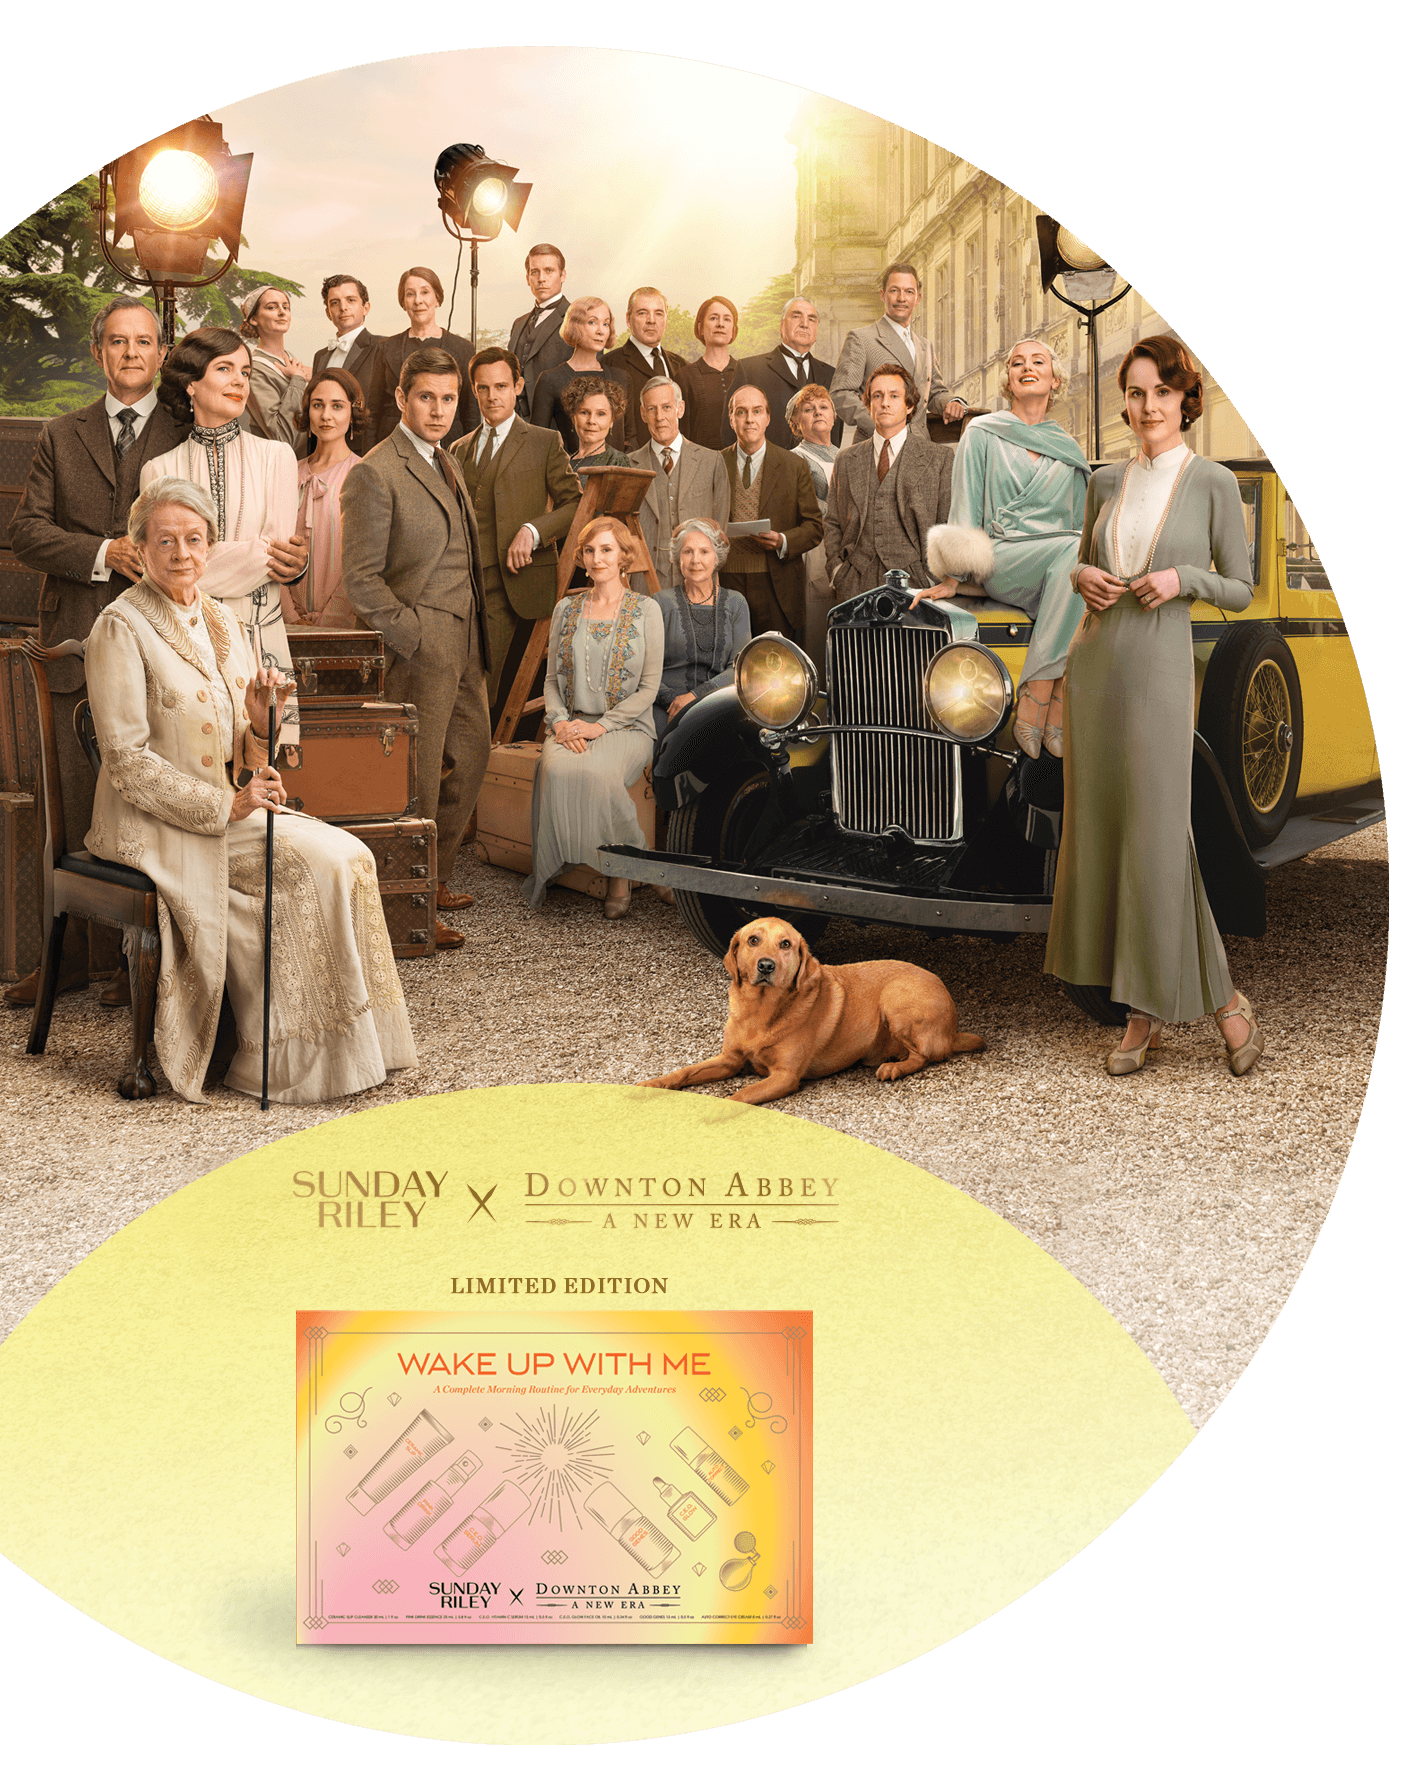 image of downton abbey cast with limited edition wake up with me kit at the bottom